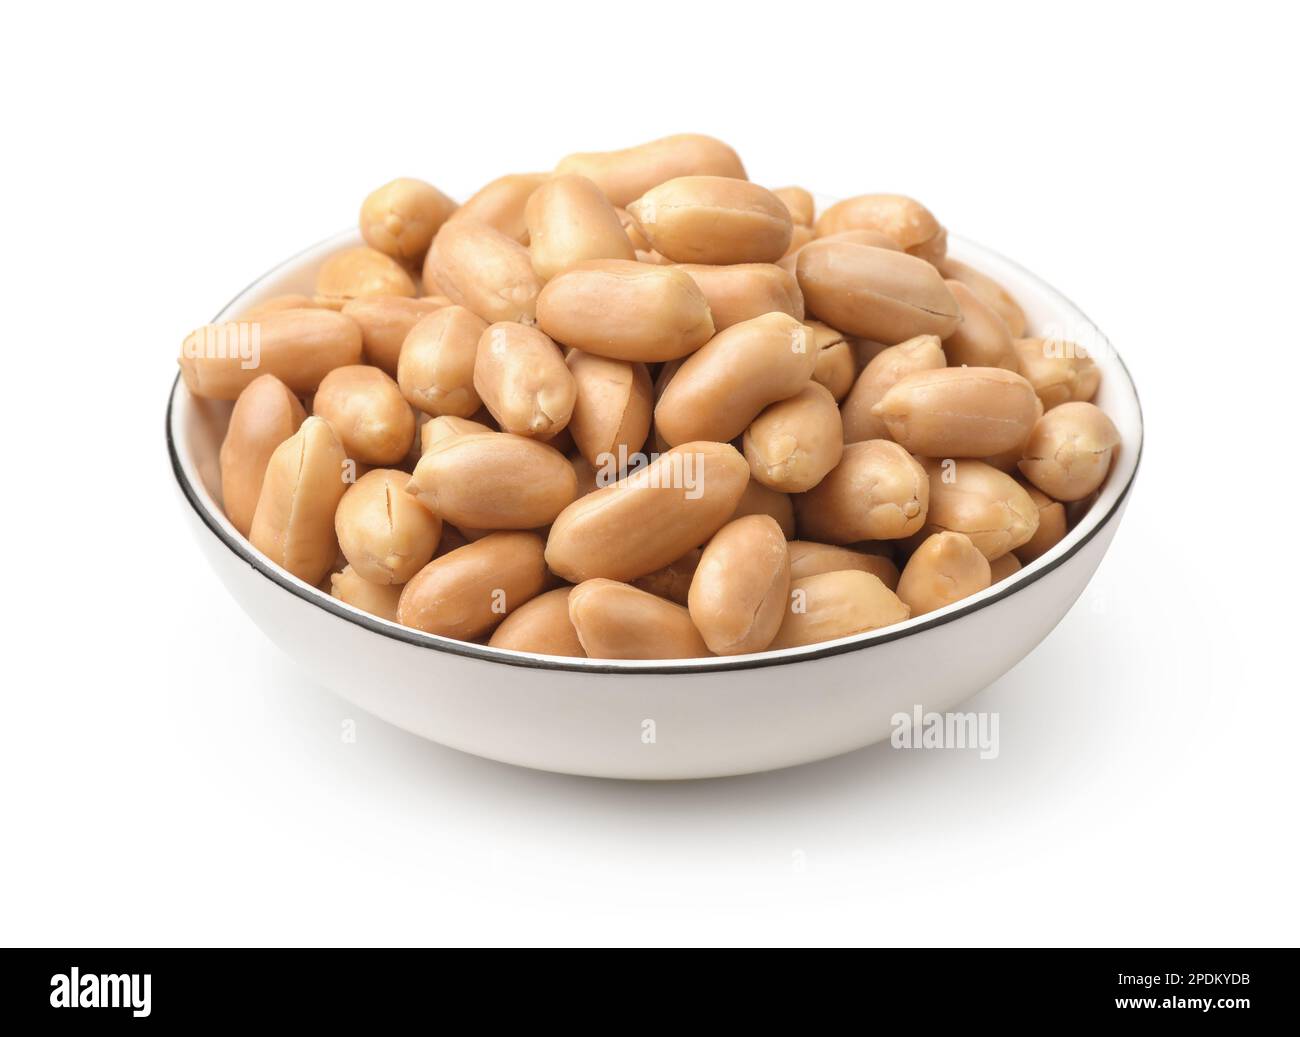 Salted roasted peanuts in ceramic plate isolated on white Stock Photo